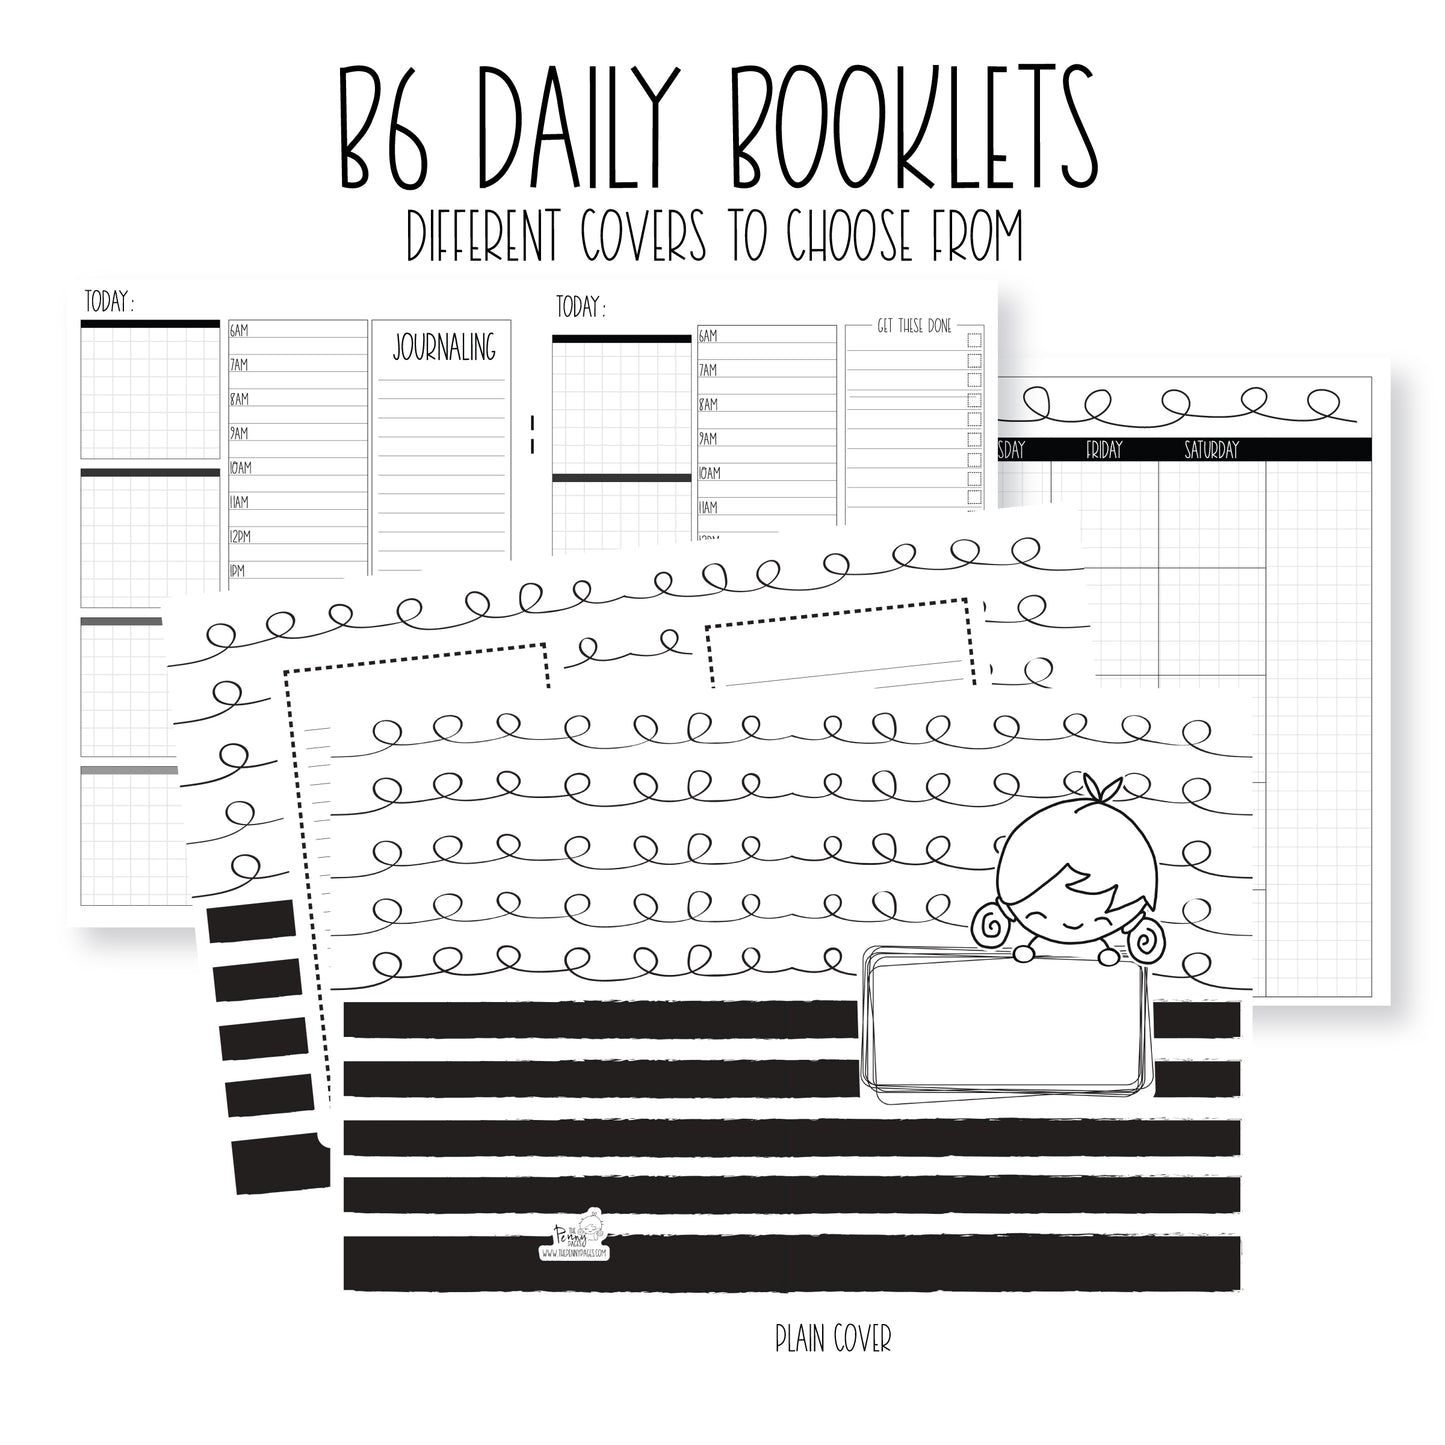 B6 Daily Booklets